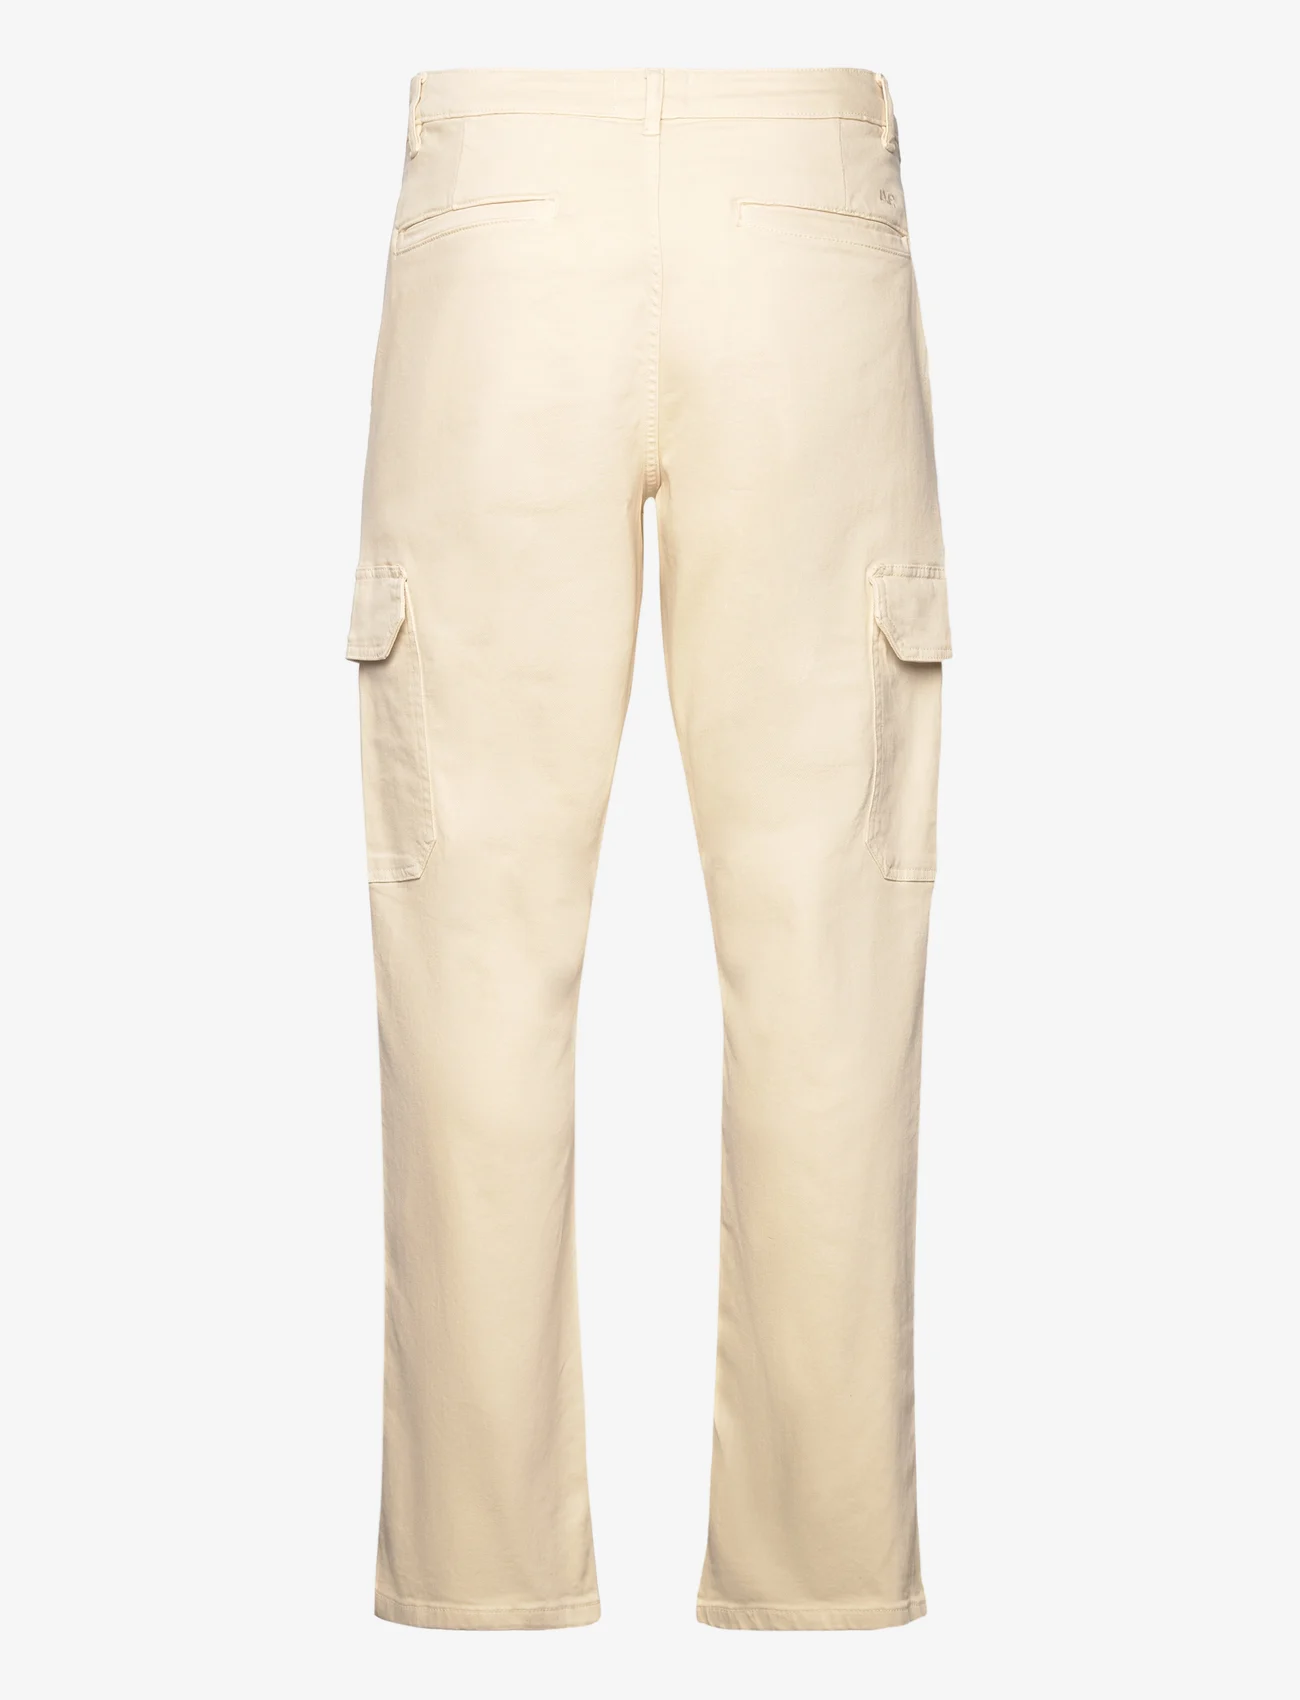 Denim project - DPCargo Recycled Pants - cargohose - bleached sand - 1